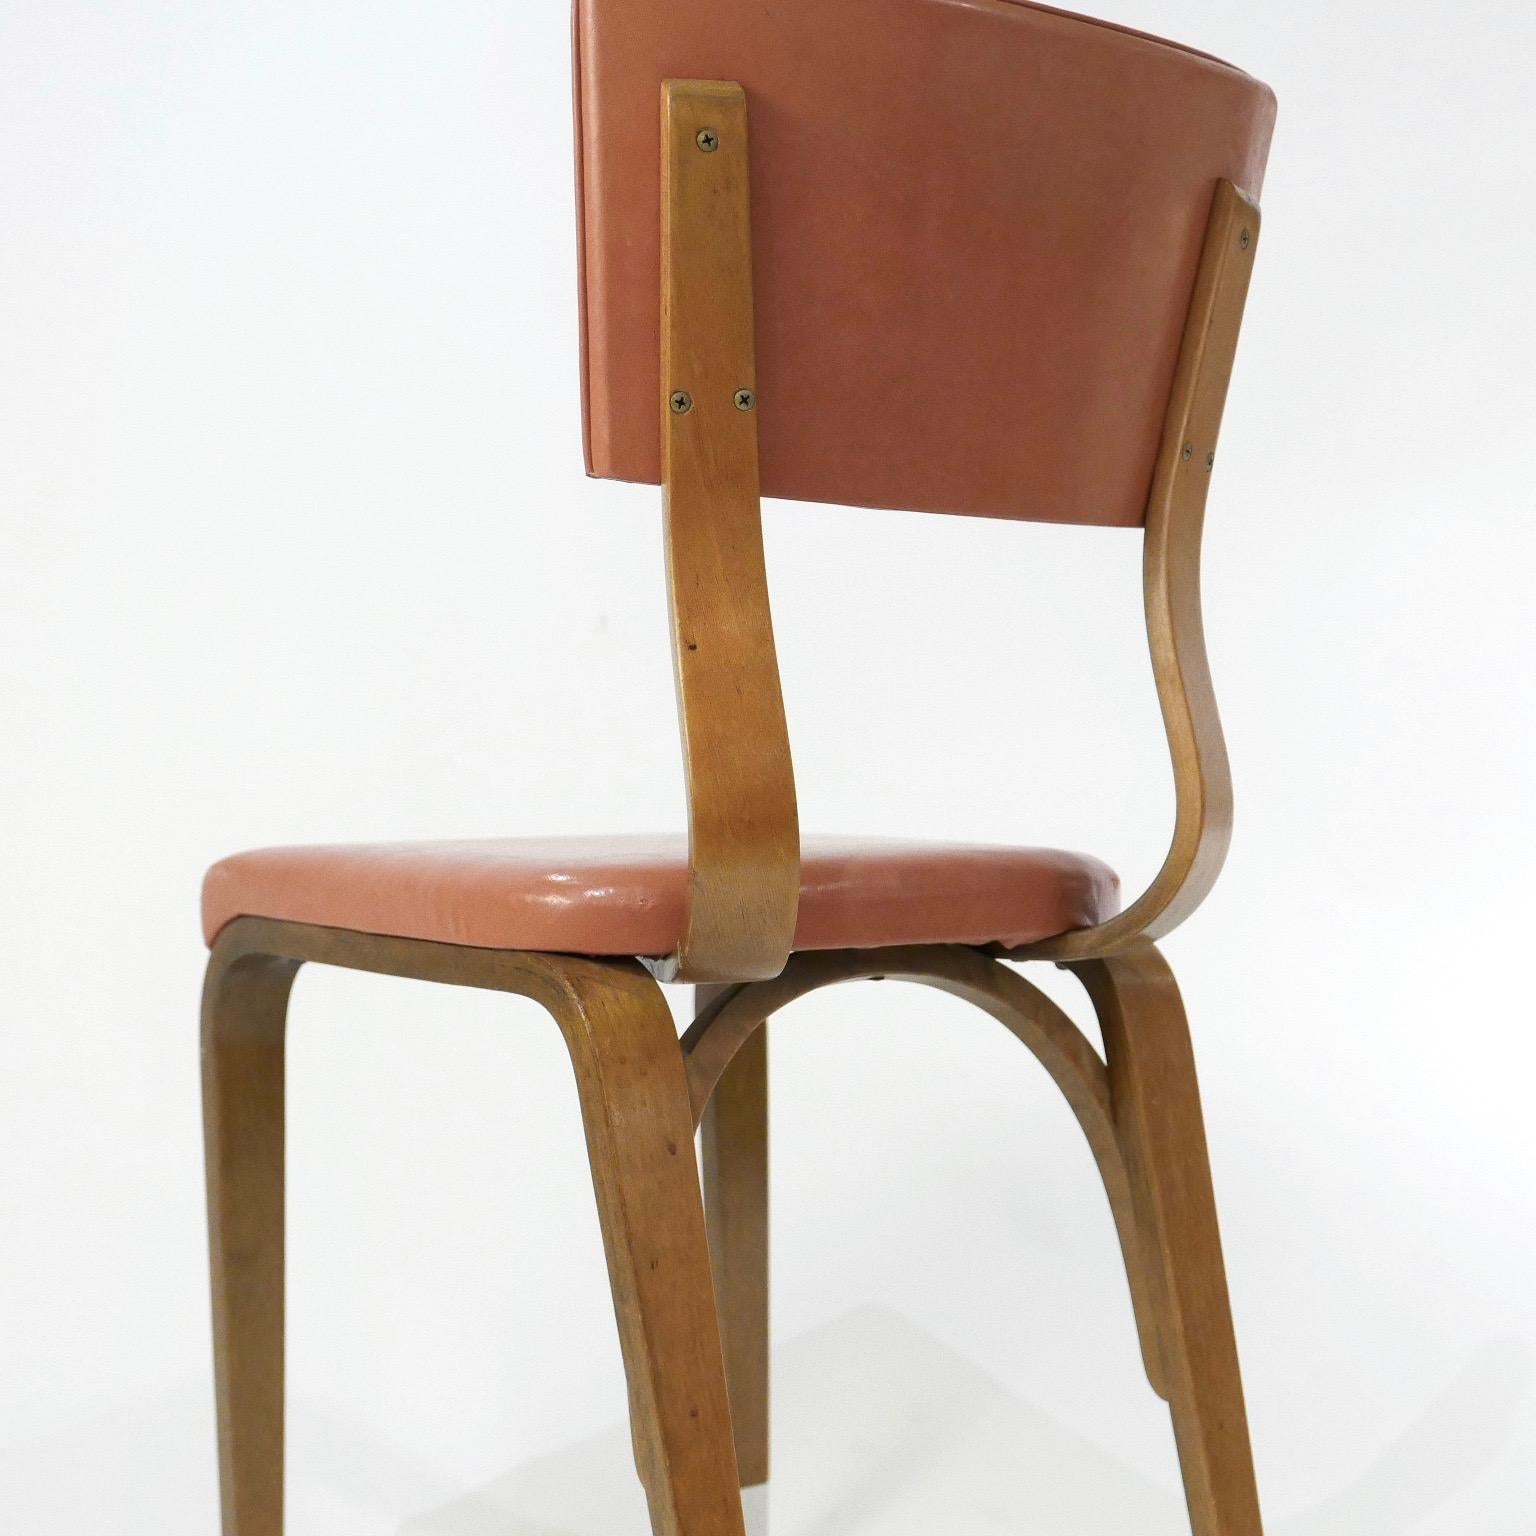 Set of 8 1950s Thonet Padded Bentwood Bent Plywood Dining, Cafe, or Desk Chairs  (20. Jahrhundert)